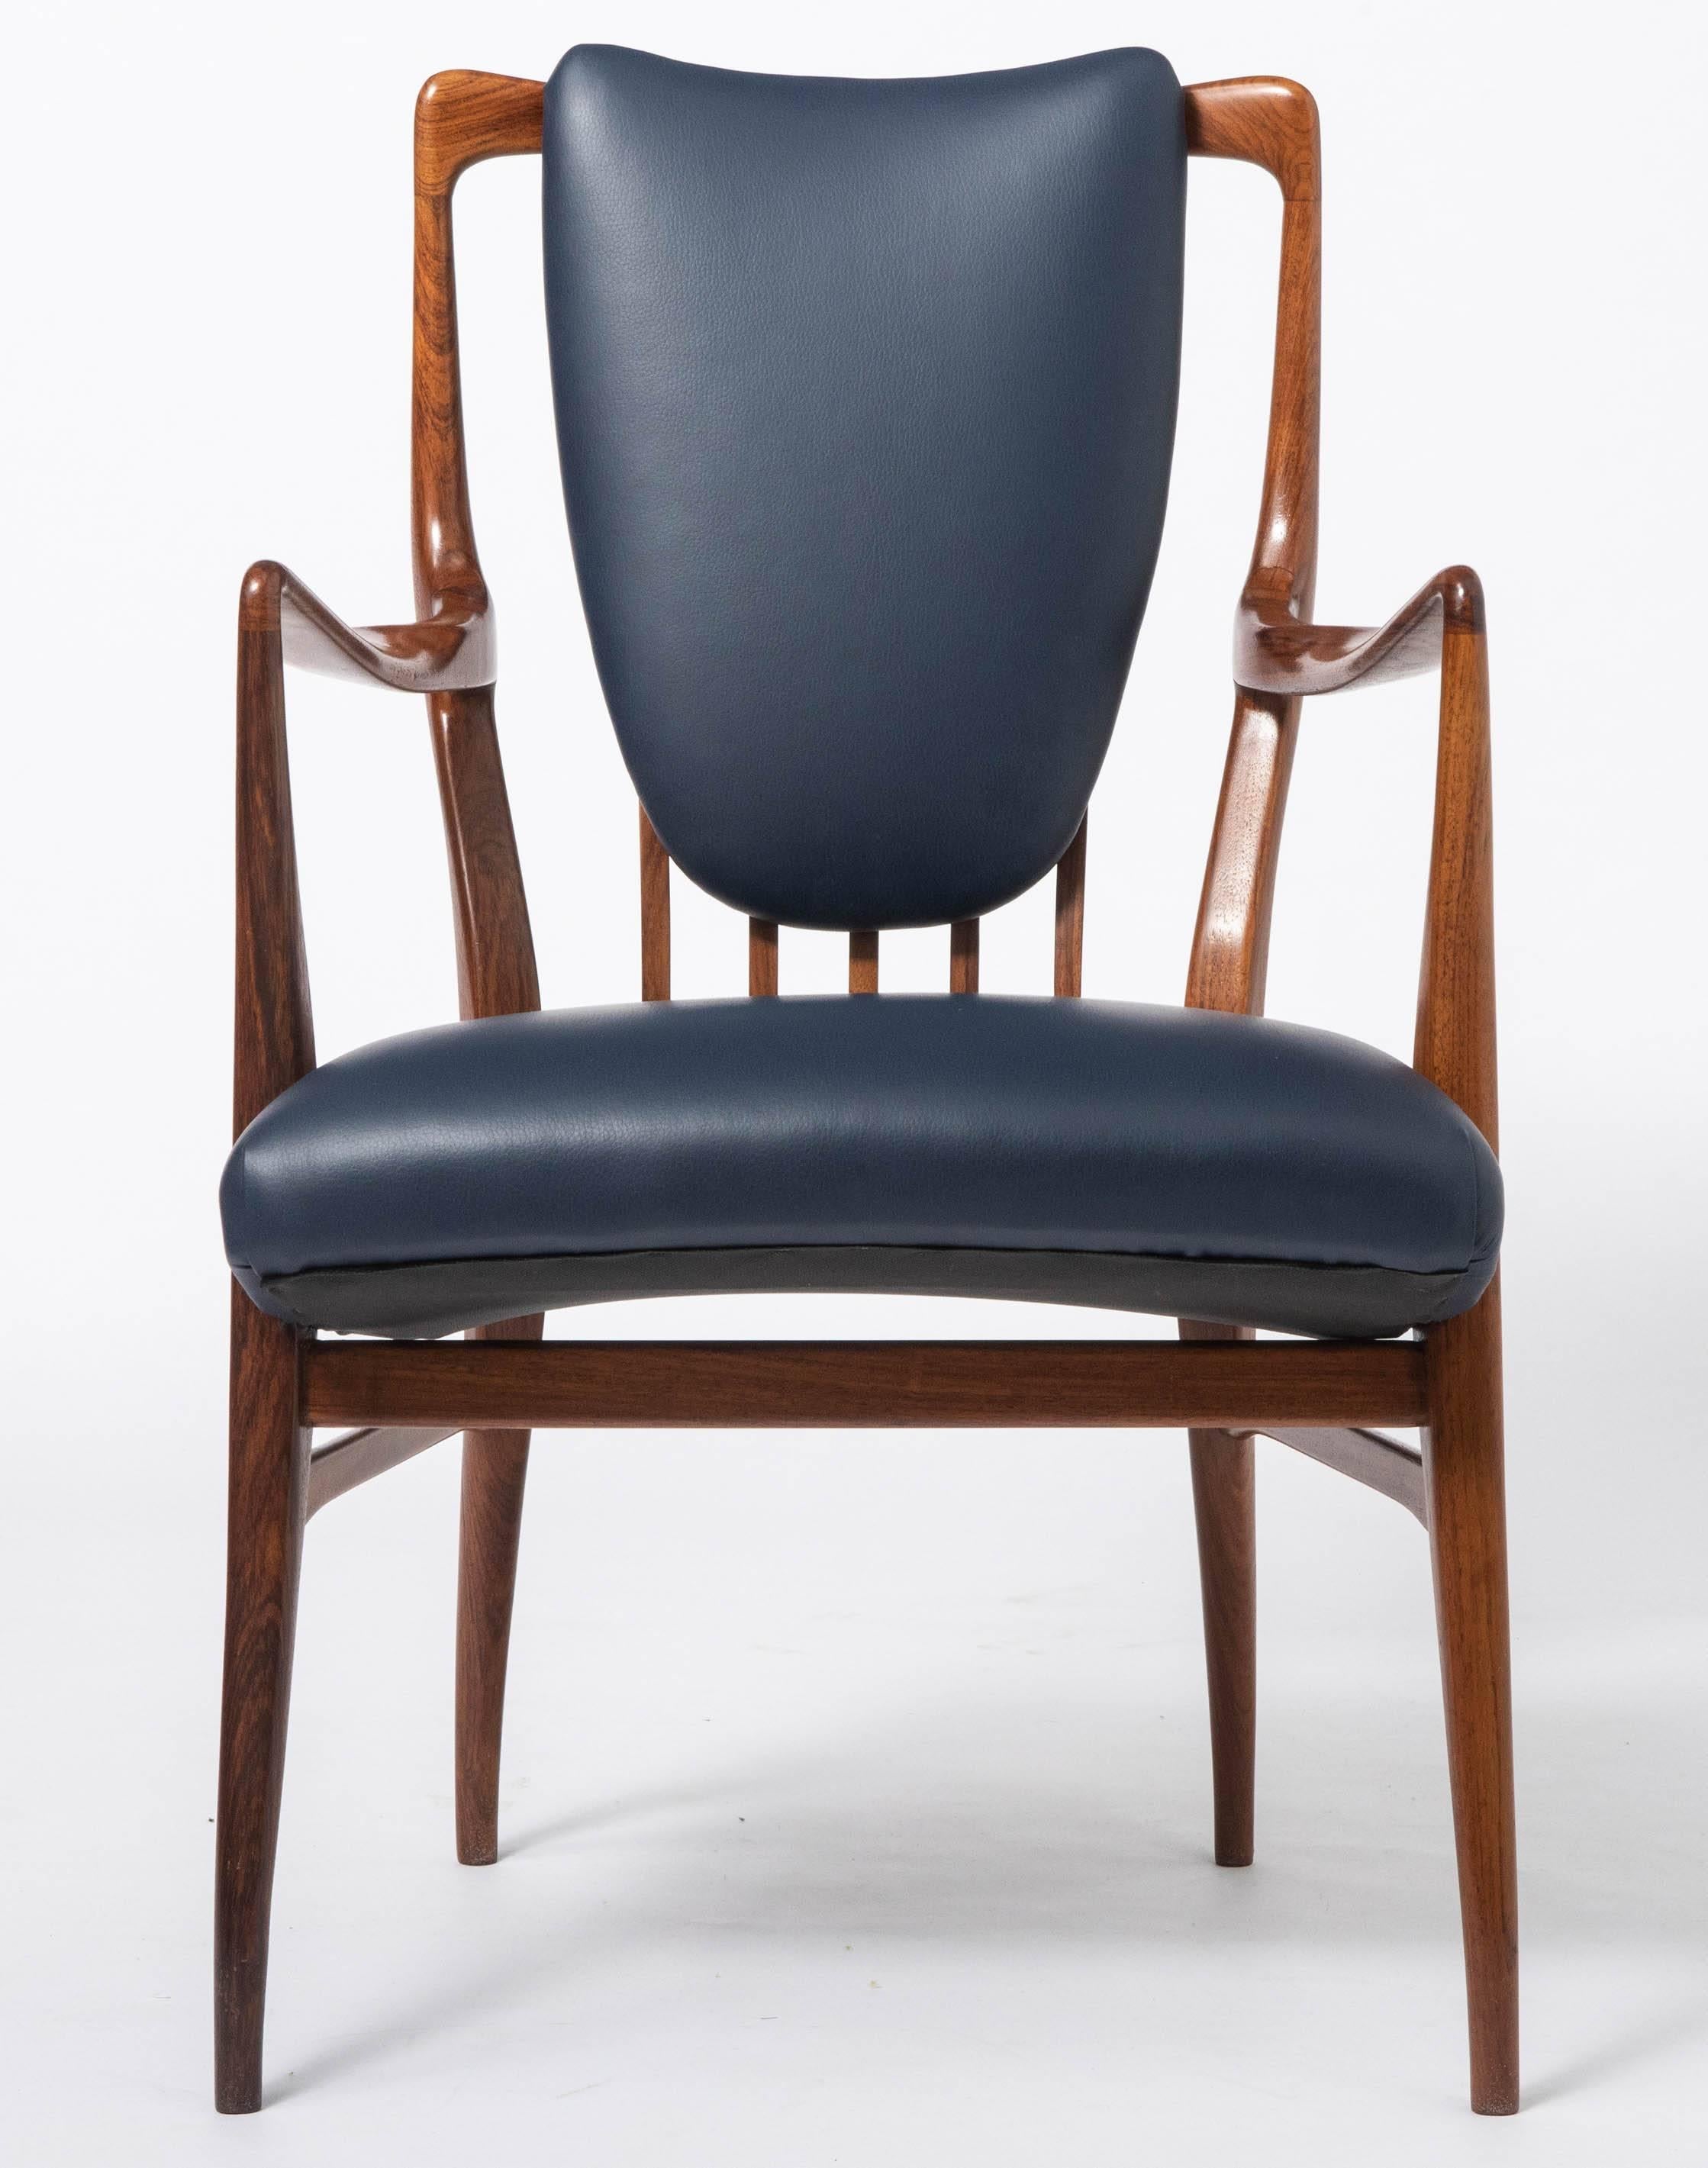 English Andrew J Milne Rosewood Set of Eight Chairs, England, circa 1960